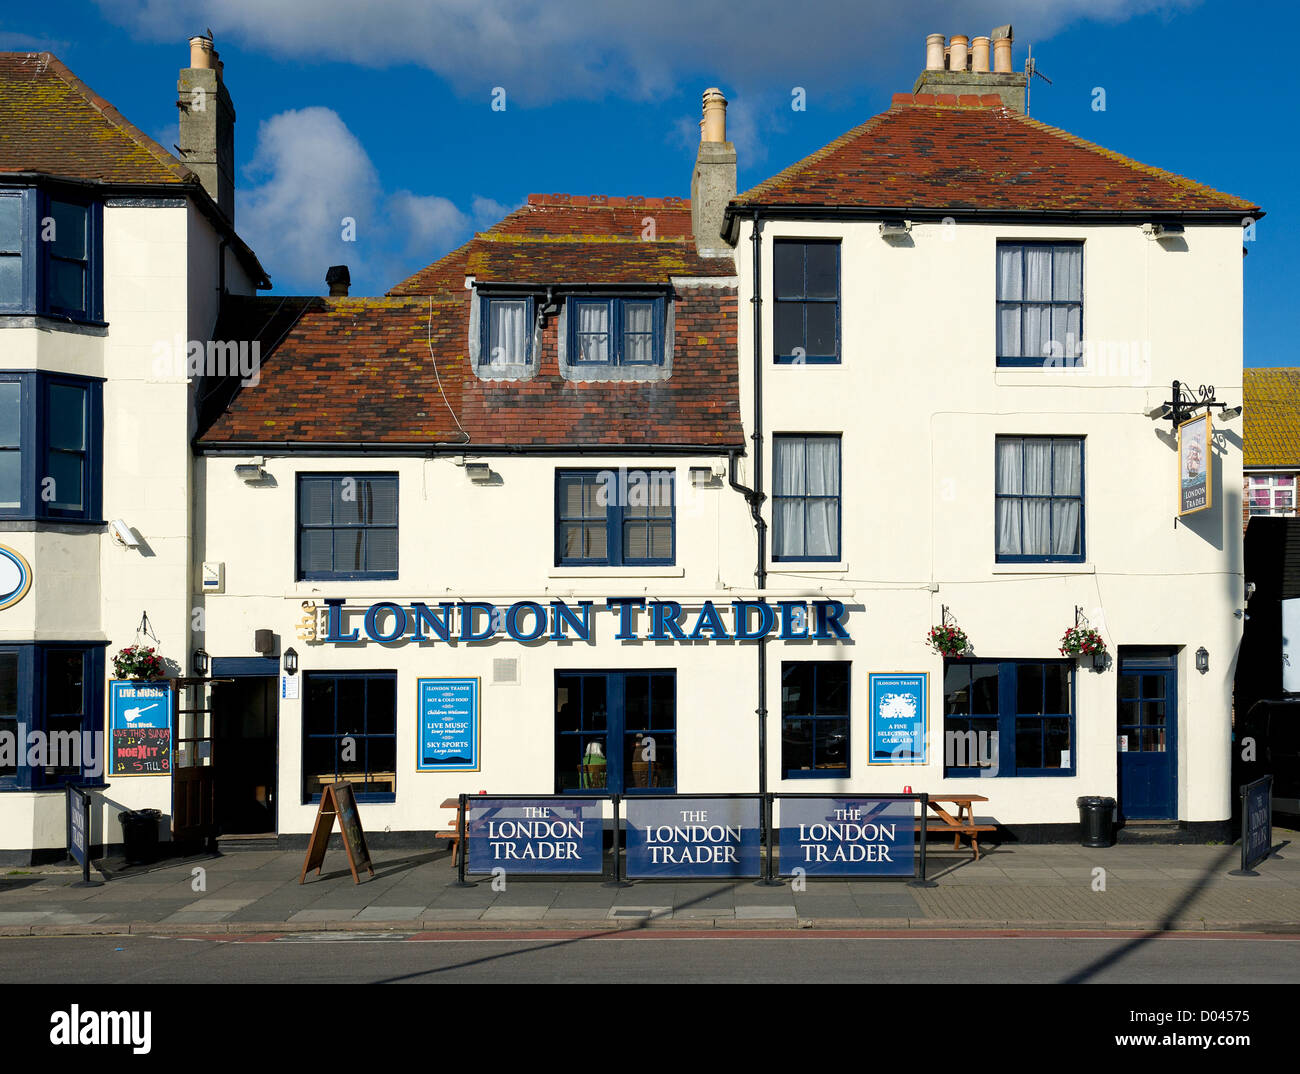 The London Trader public house in Old Hastings. Stock Photo